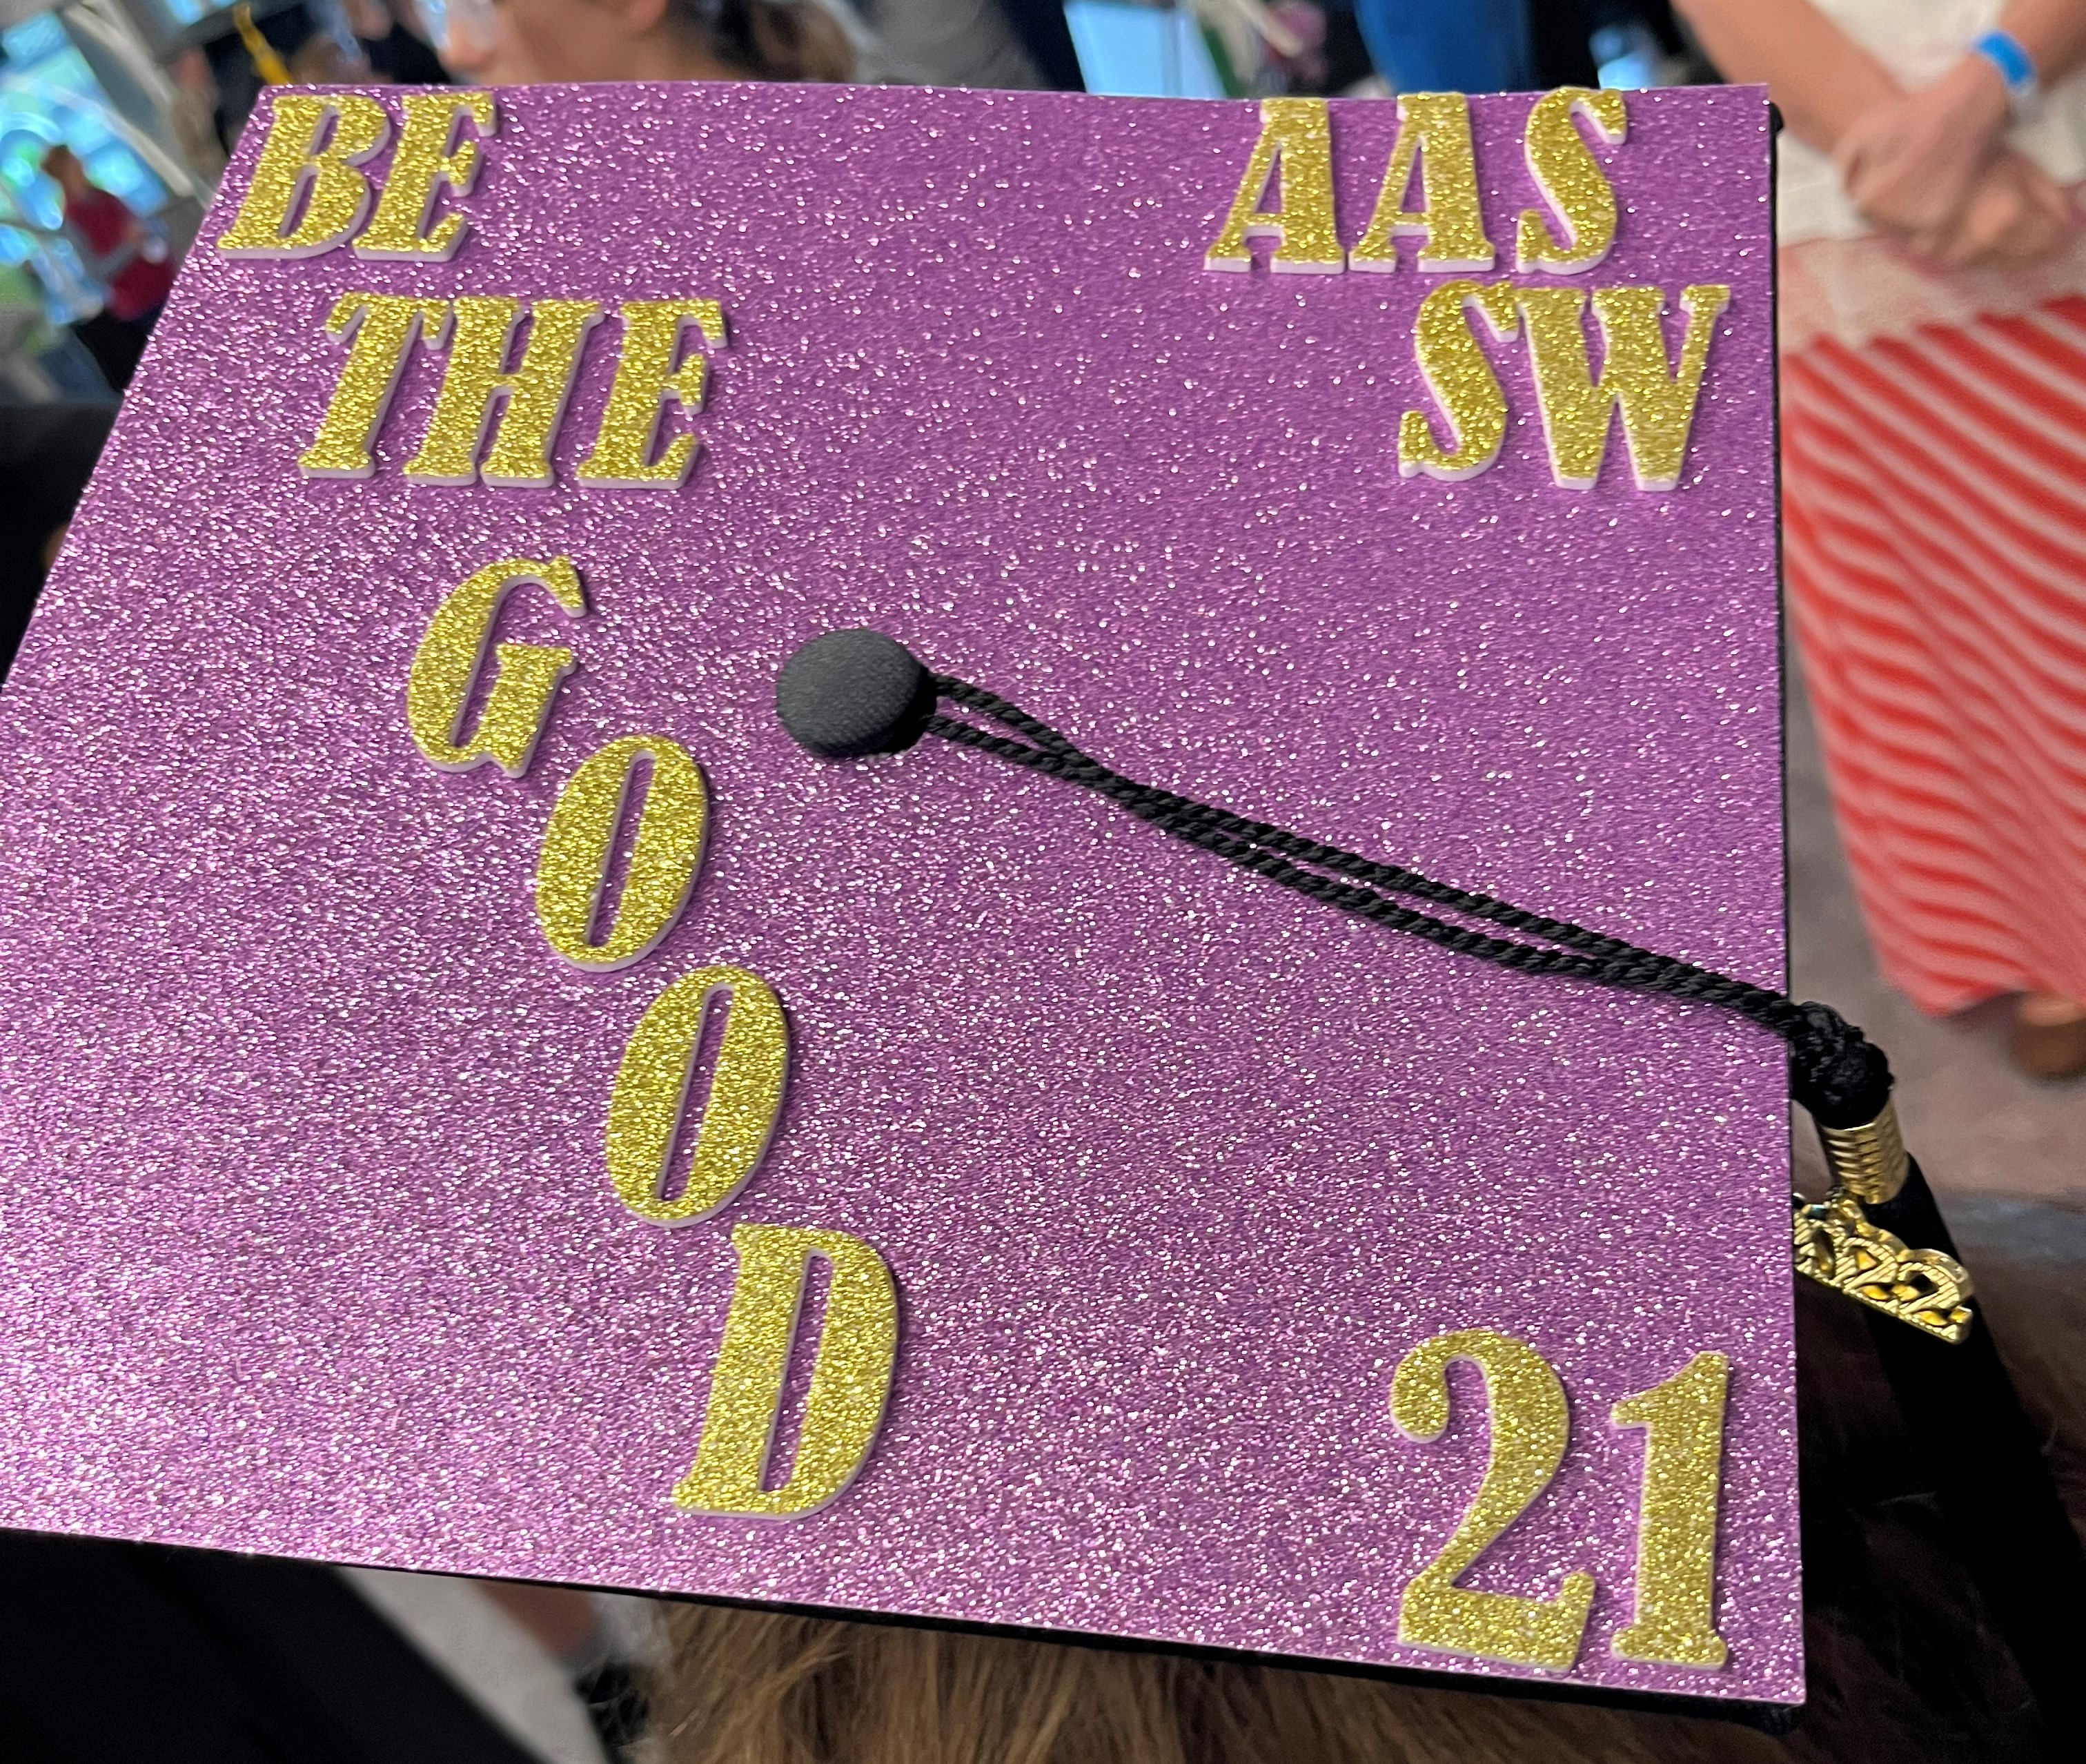 Believe there is good in the world - graduation cap